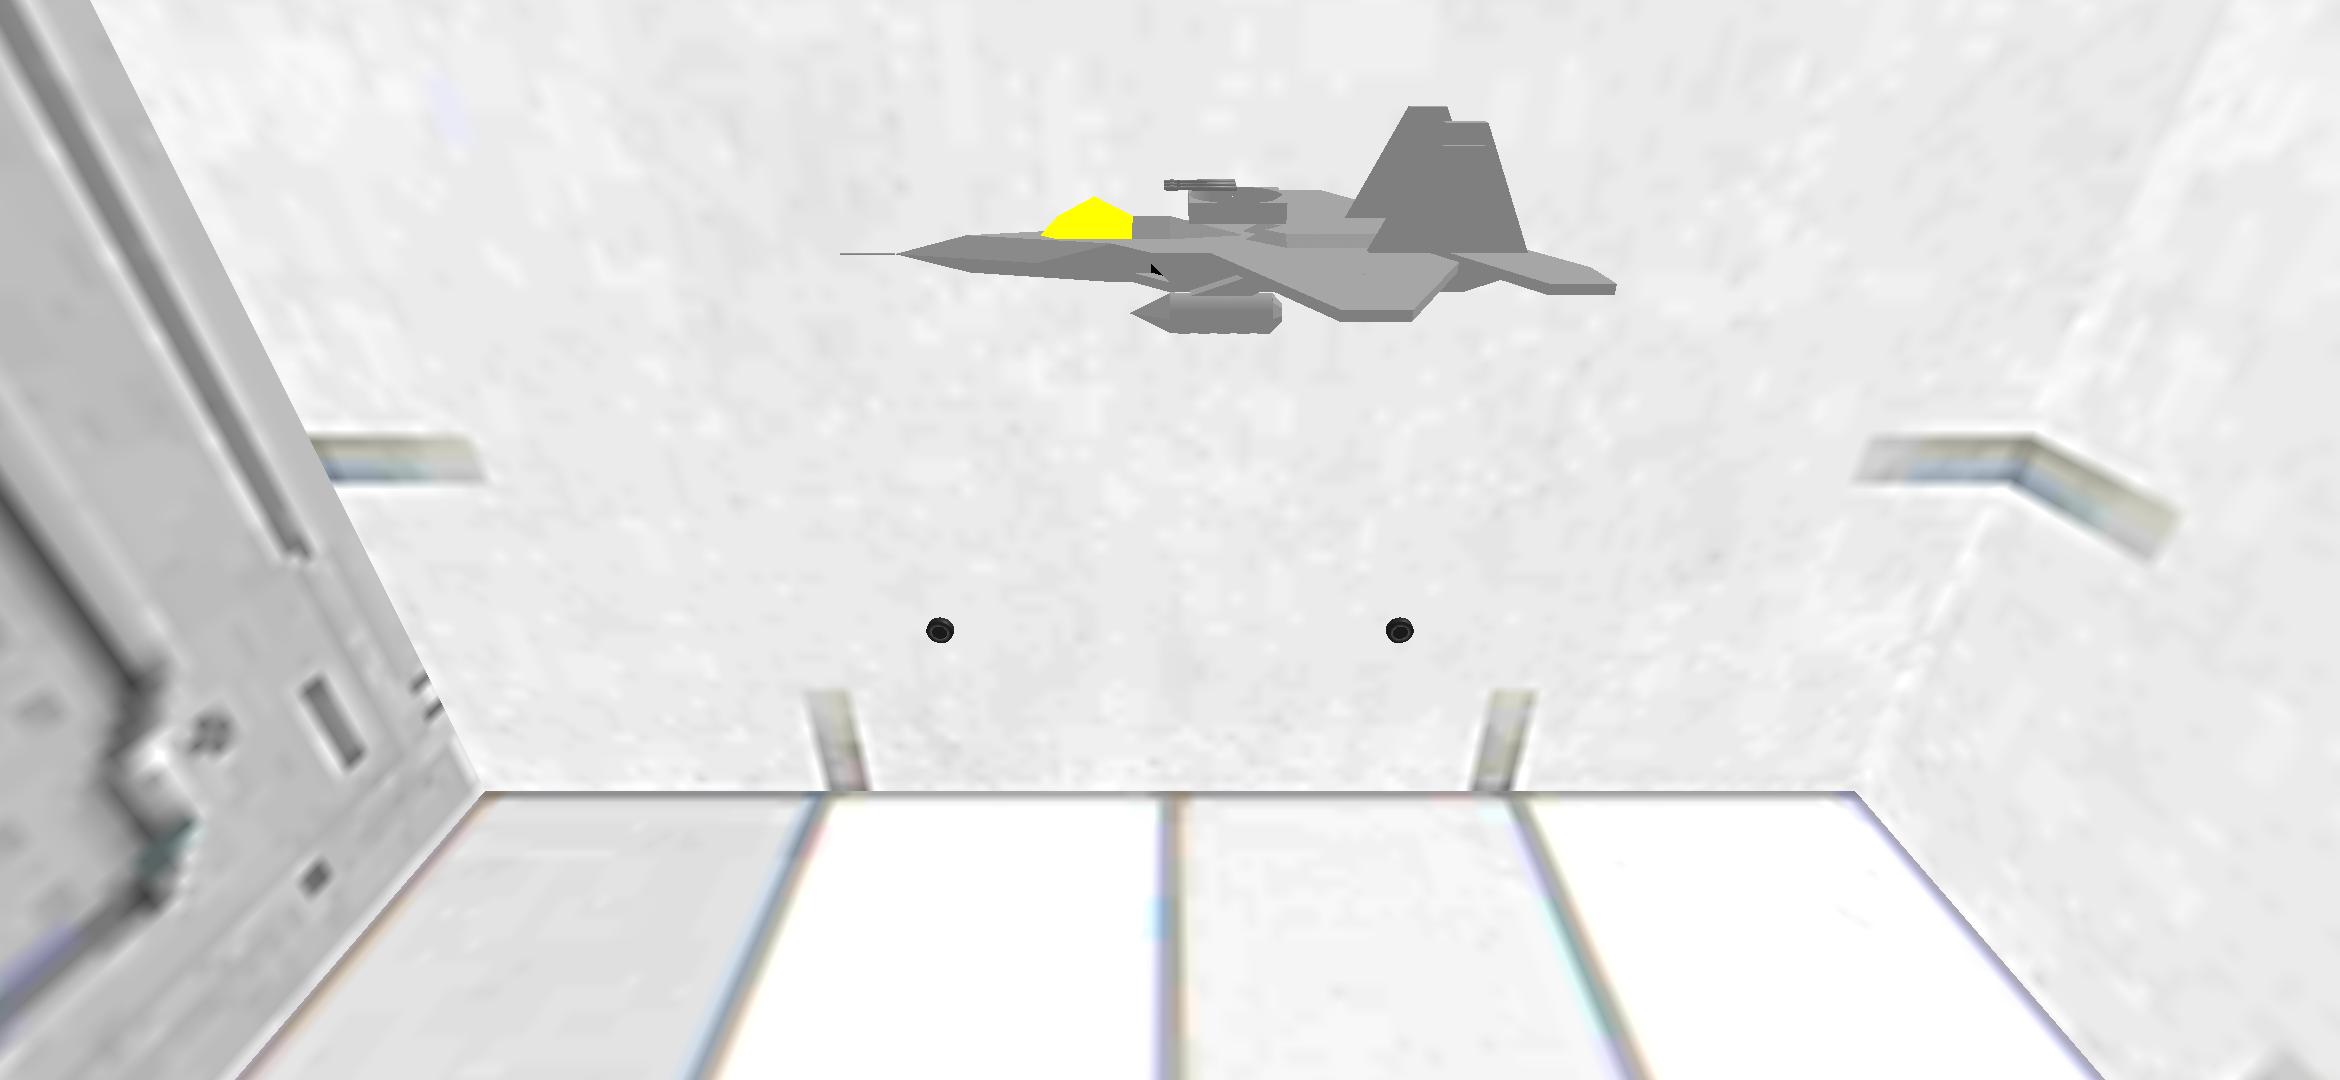 F-22 invisible flying